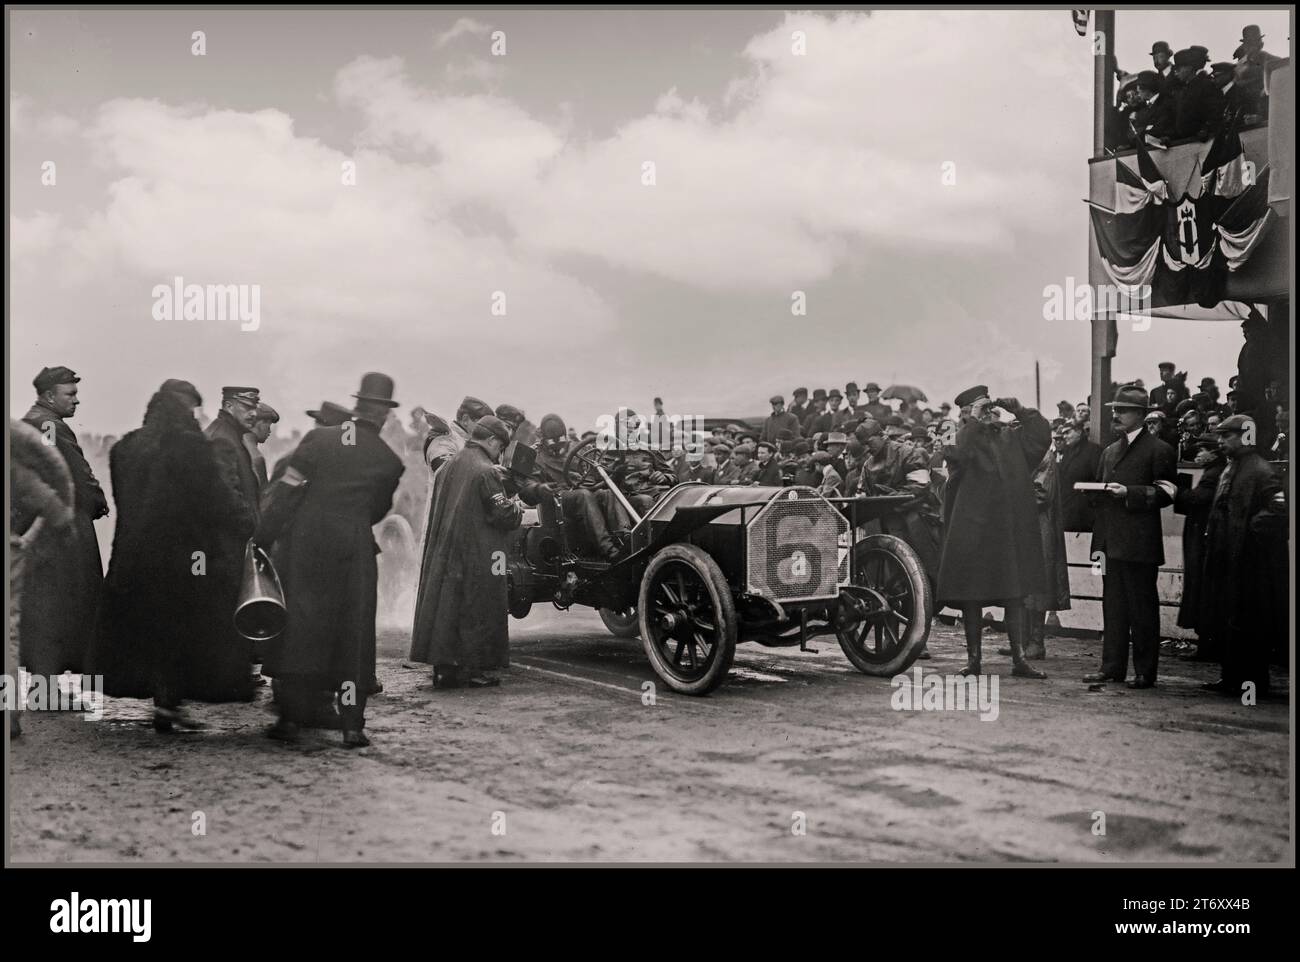 1908 Vanderbilt Cup Race Herb Lytle before the start. Herb Lytle finished a close second in the Isotta less than two minutes behind George Robertson's winning Locomobile. Herb Lytle participated in more races associated with the Vanderbilt Cup Races (6) than any other driver. Stock Photo